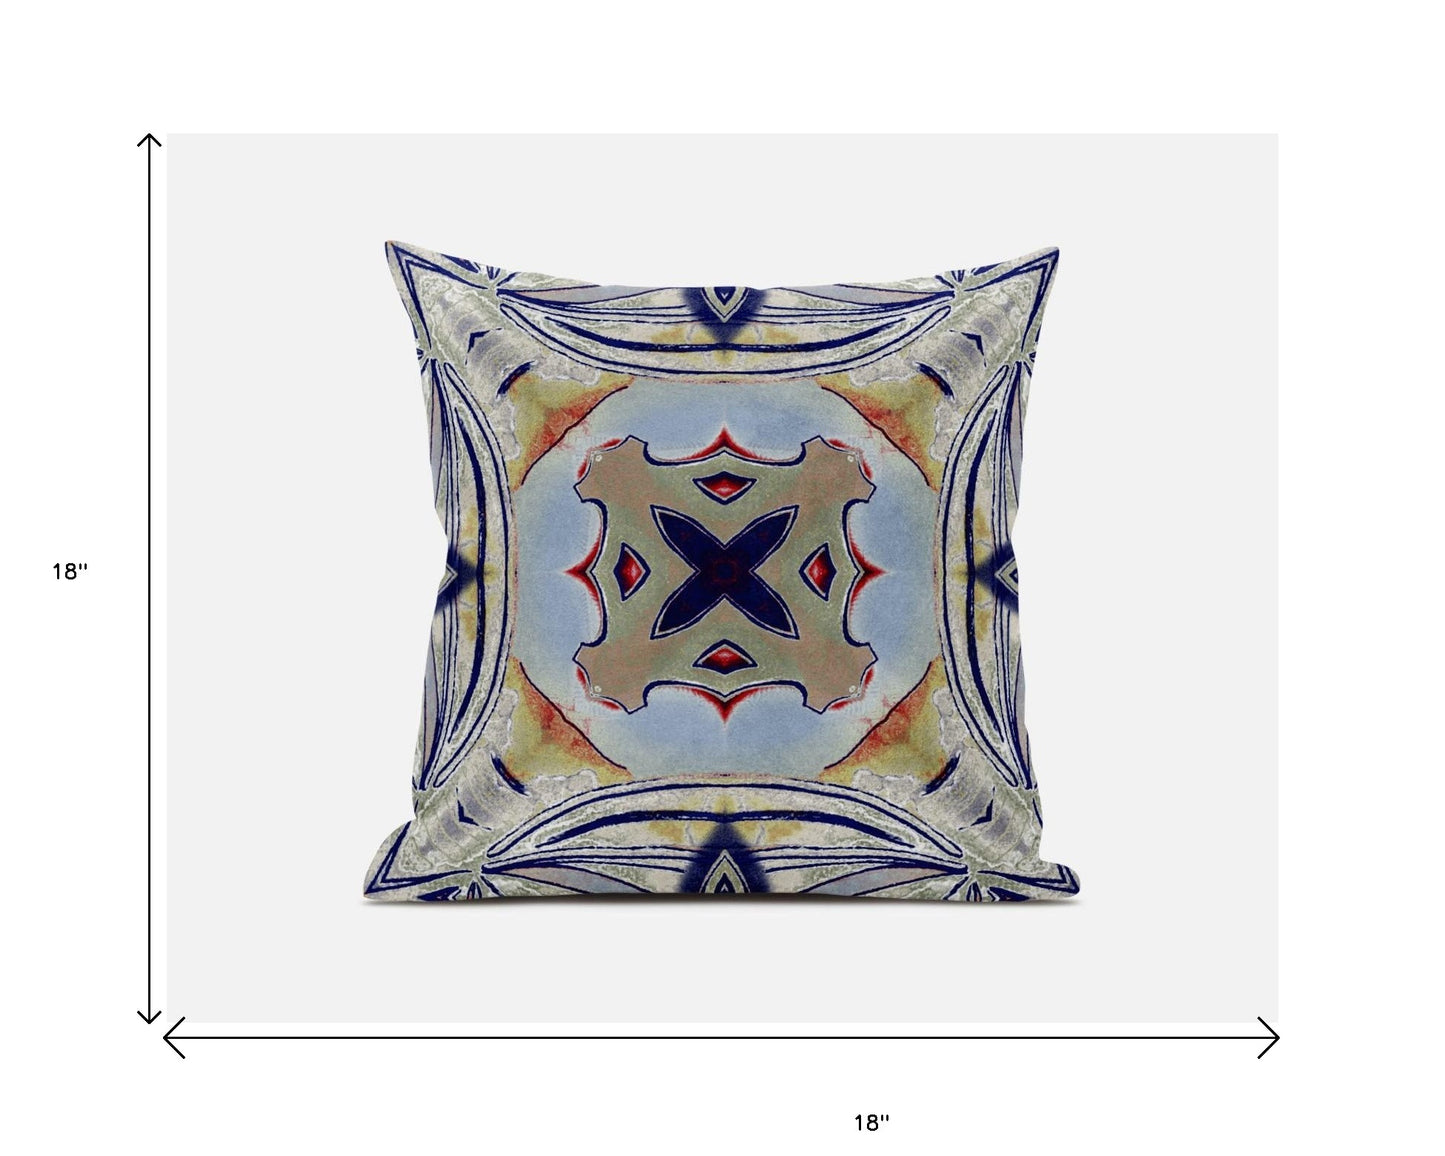 18” Navy Sage Geo Tribal Suede Throw Pillow